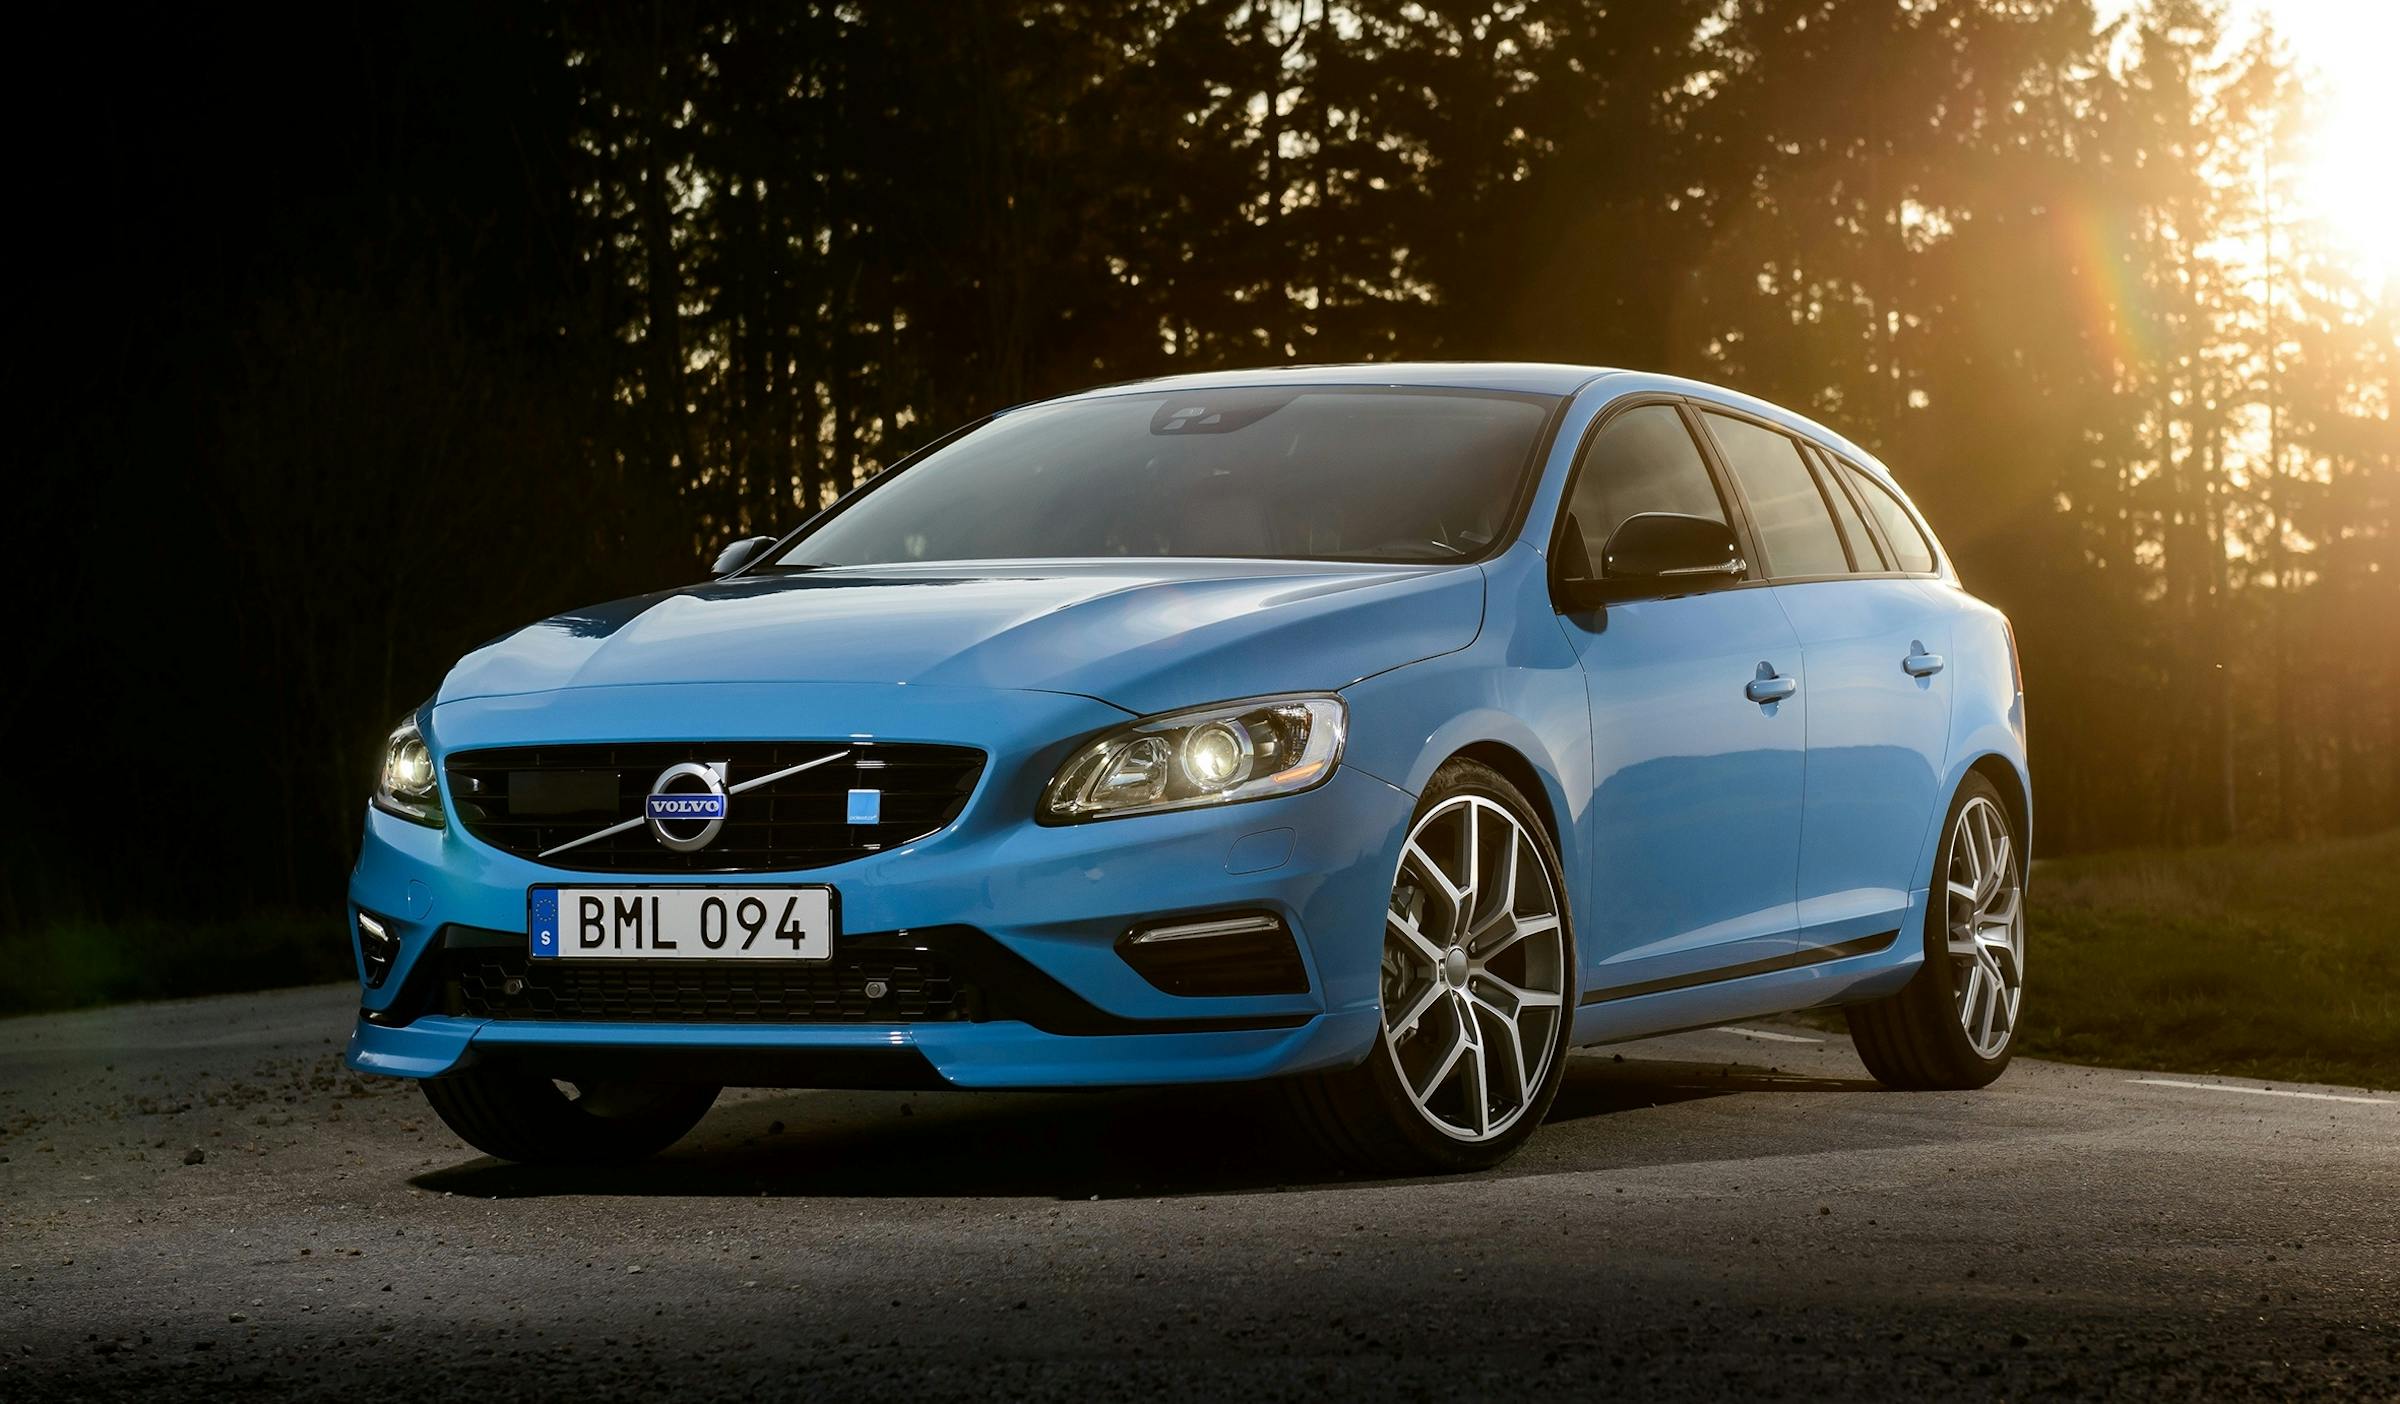 The Volvo V60 Polestar is a sure-fire future classic - Hagerty Media